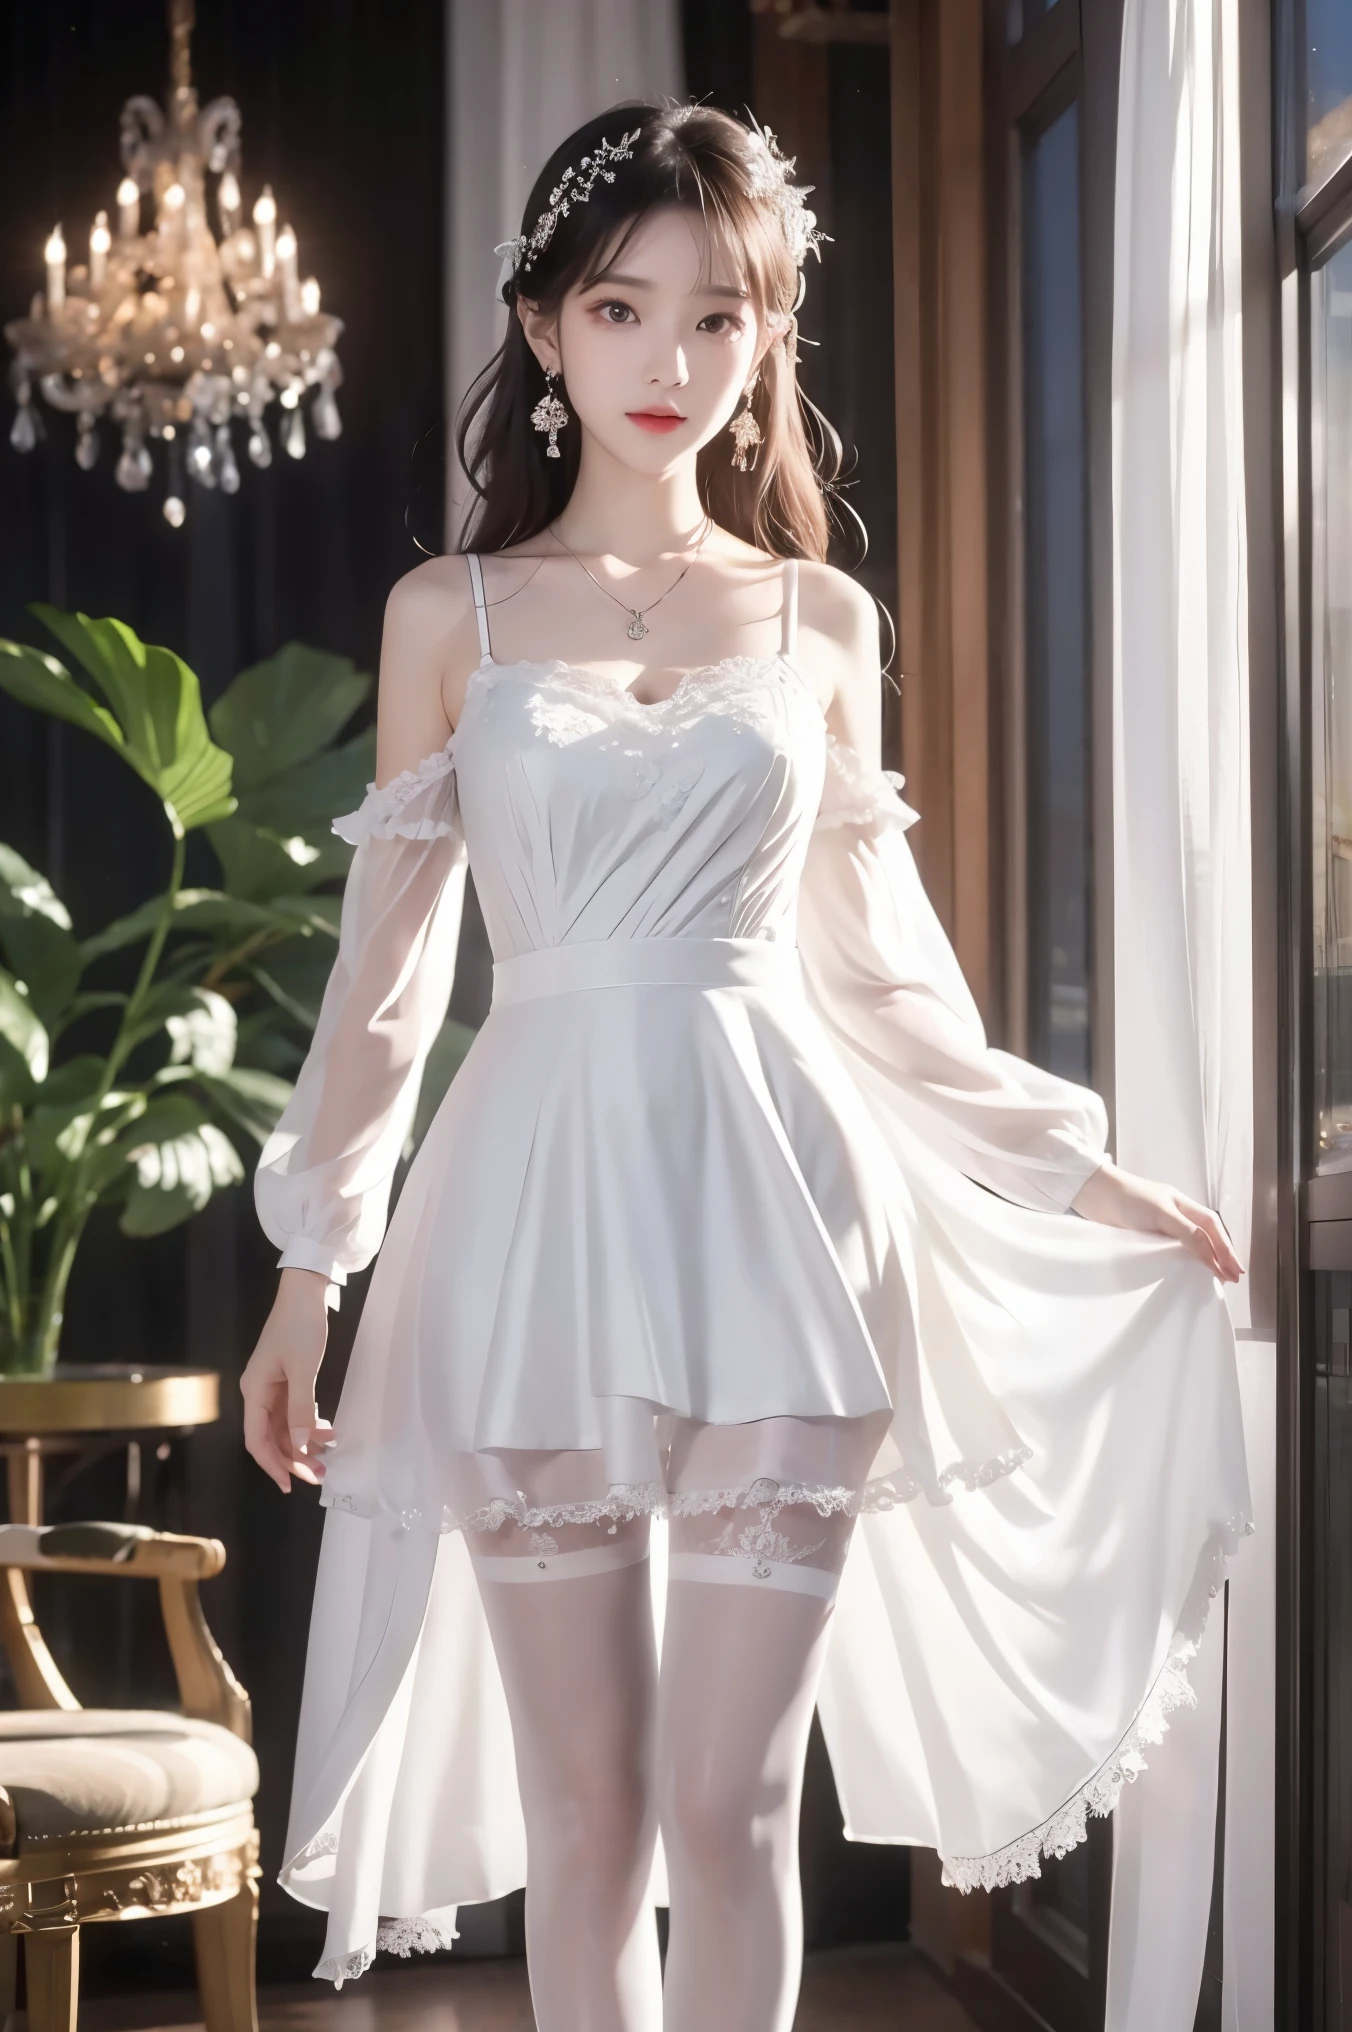 Realism: 1.3, masterpiece, highest quality, high resolution, details: 1.2, 1 girl, hair clip, beautiful face, delicate eyes, tassel earrings, necklace, ribbon, elegant standing posture, aesthetics, movie lighting, ray tracing, depth of field, layering, fluttering, lace whole body, one foot white pantyhose, one foot black pantyhose